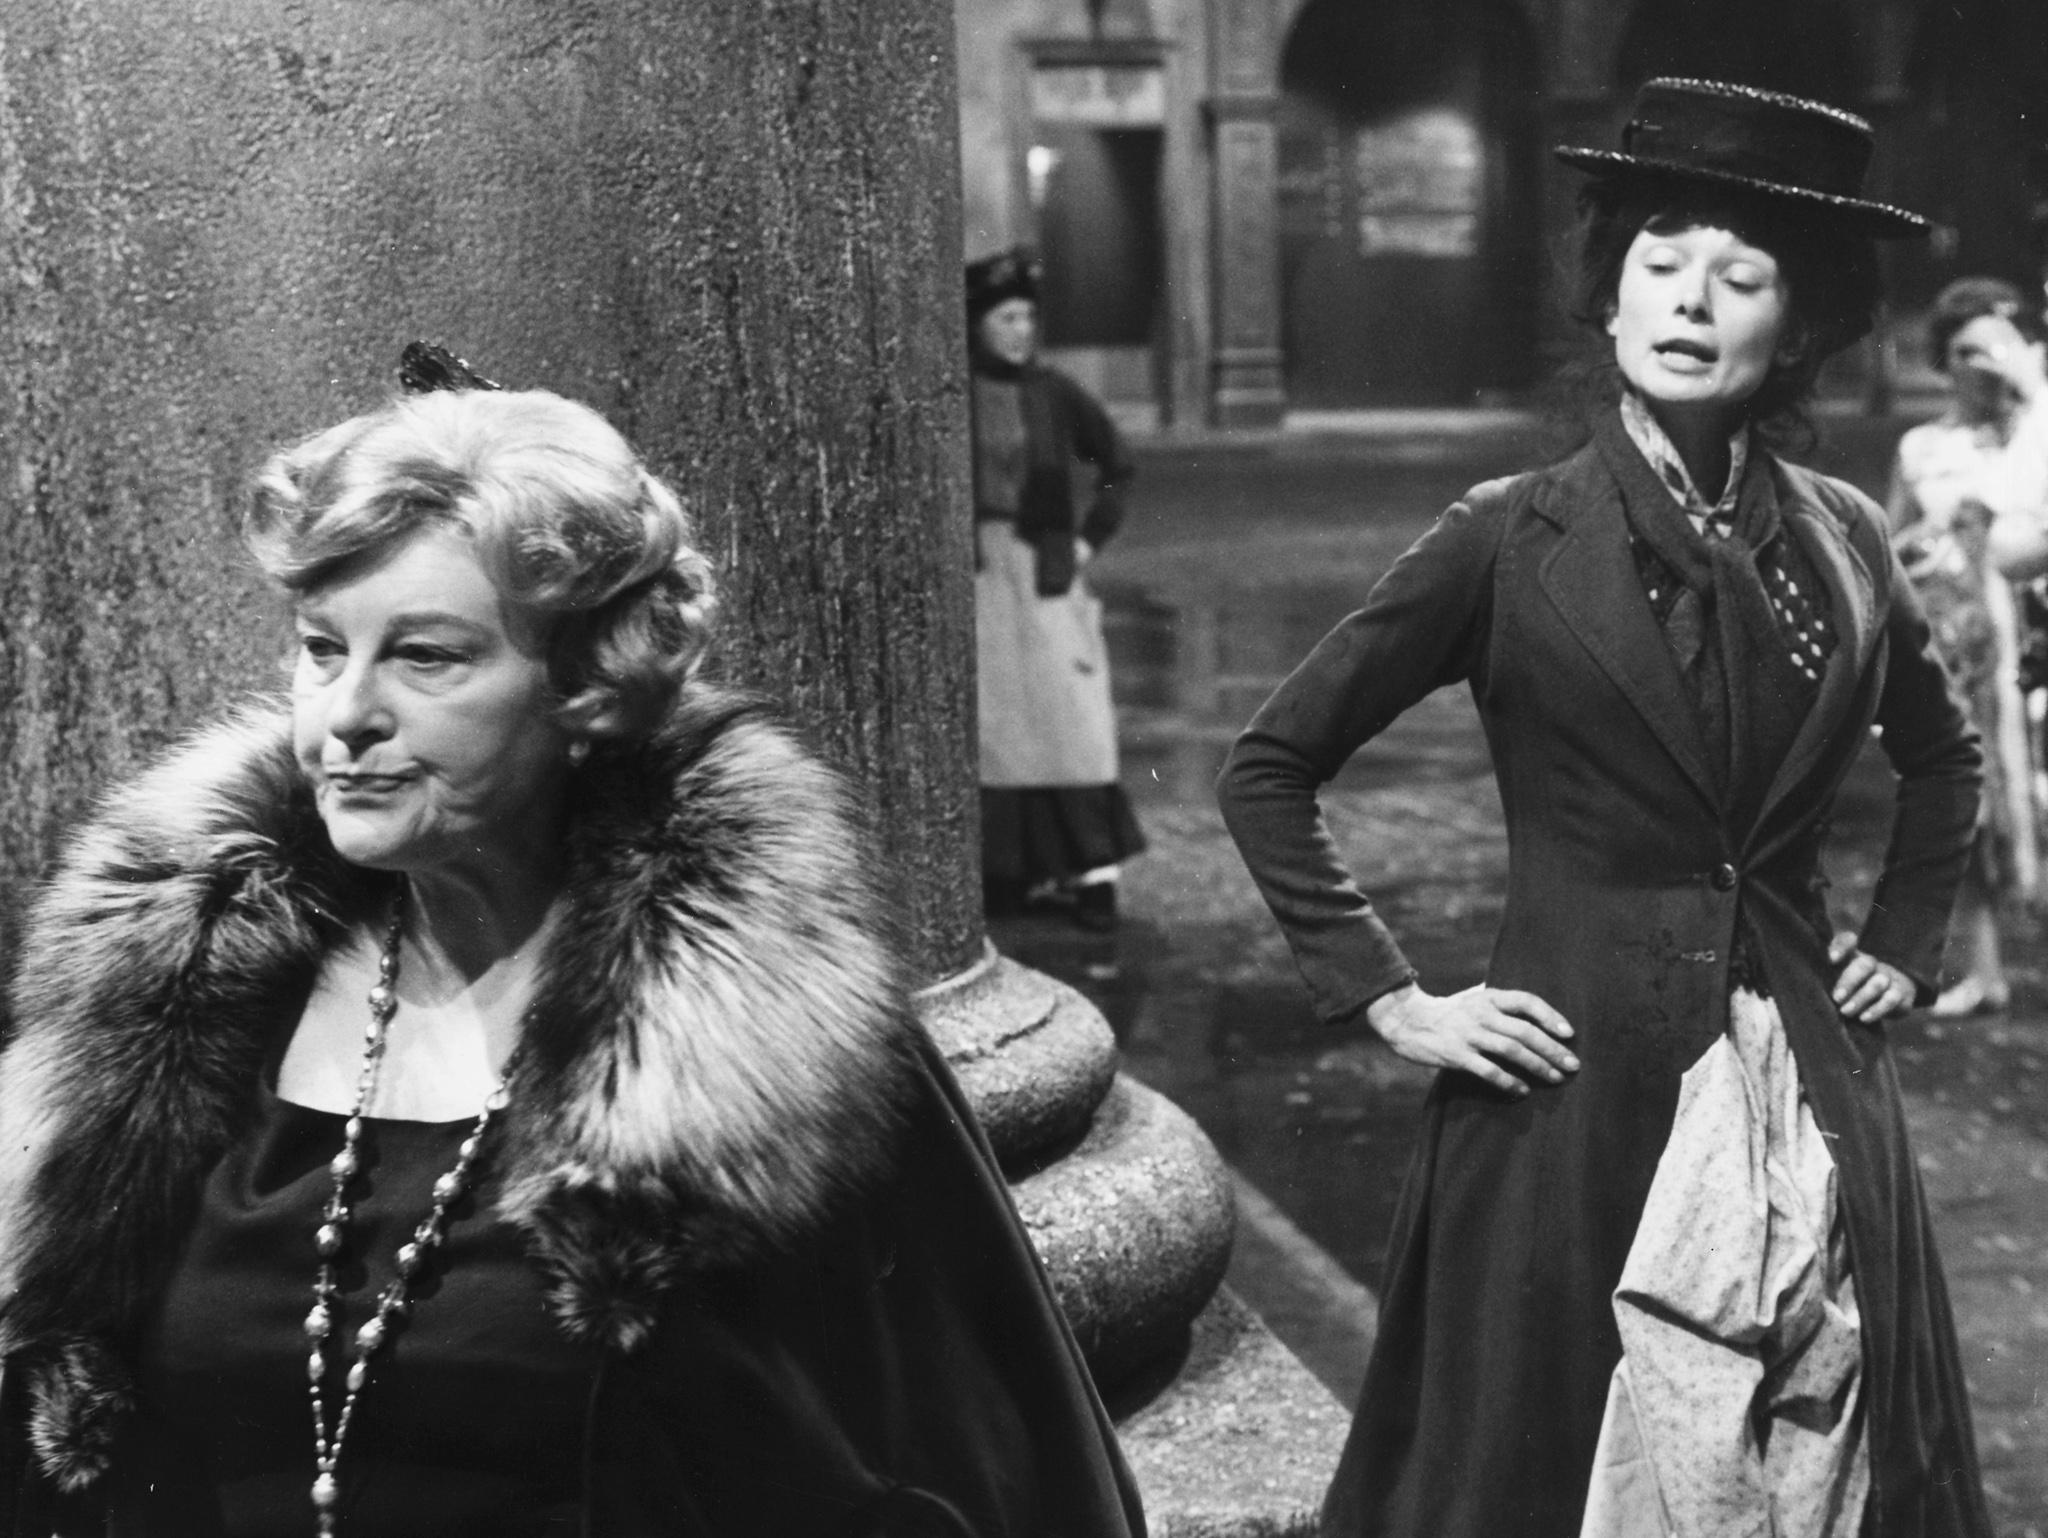 Isobel Elsom (left) and Audrey Hepburn in a scene from the film 'My Fair Lady', 1964